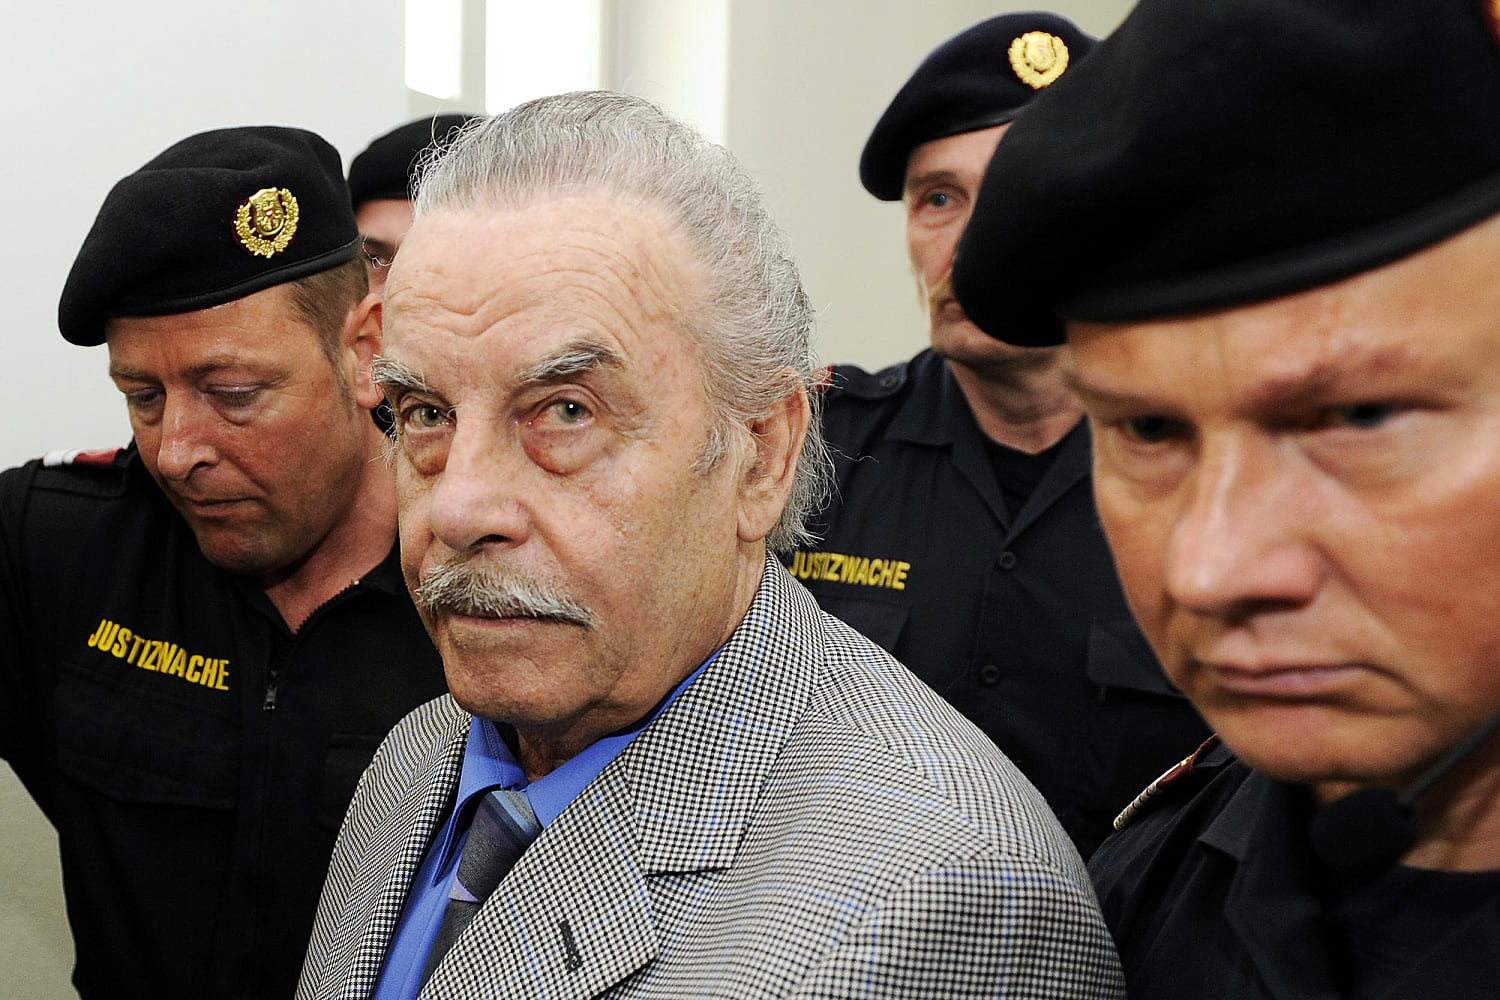 Incestuous rapist Josef Fritzl allowed to move to regular prison by court in Austria